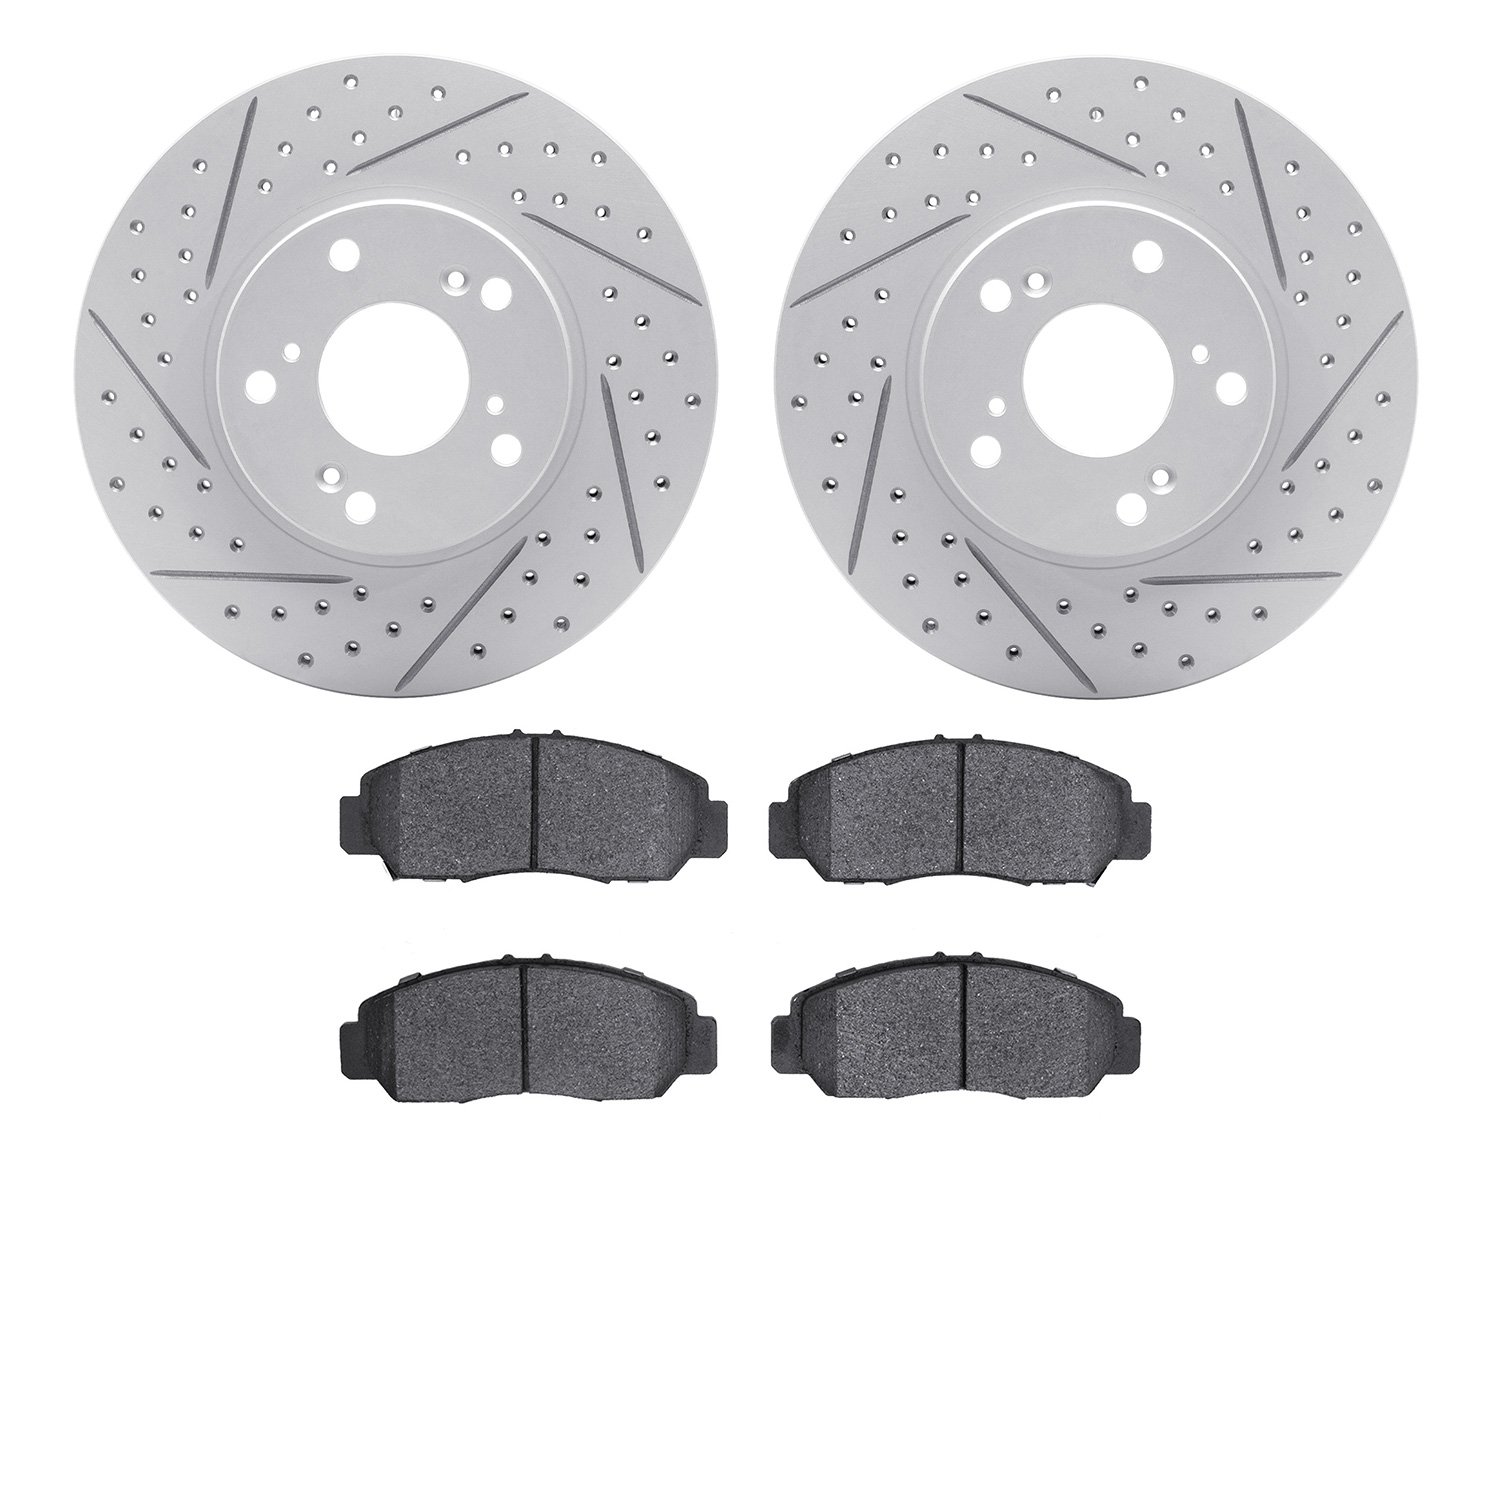 2502-59051 Geoperformance Drilled/Slotted Rotors w/5000 Advanced Brake Pads Kit, 2003-2021 Acura/Honda, Position: Front